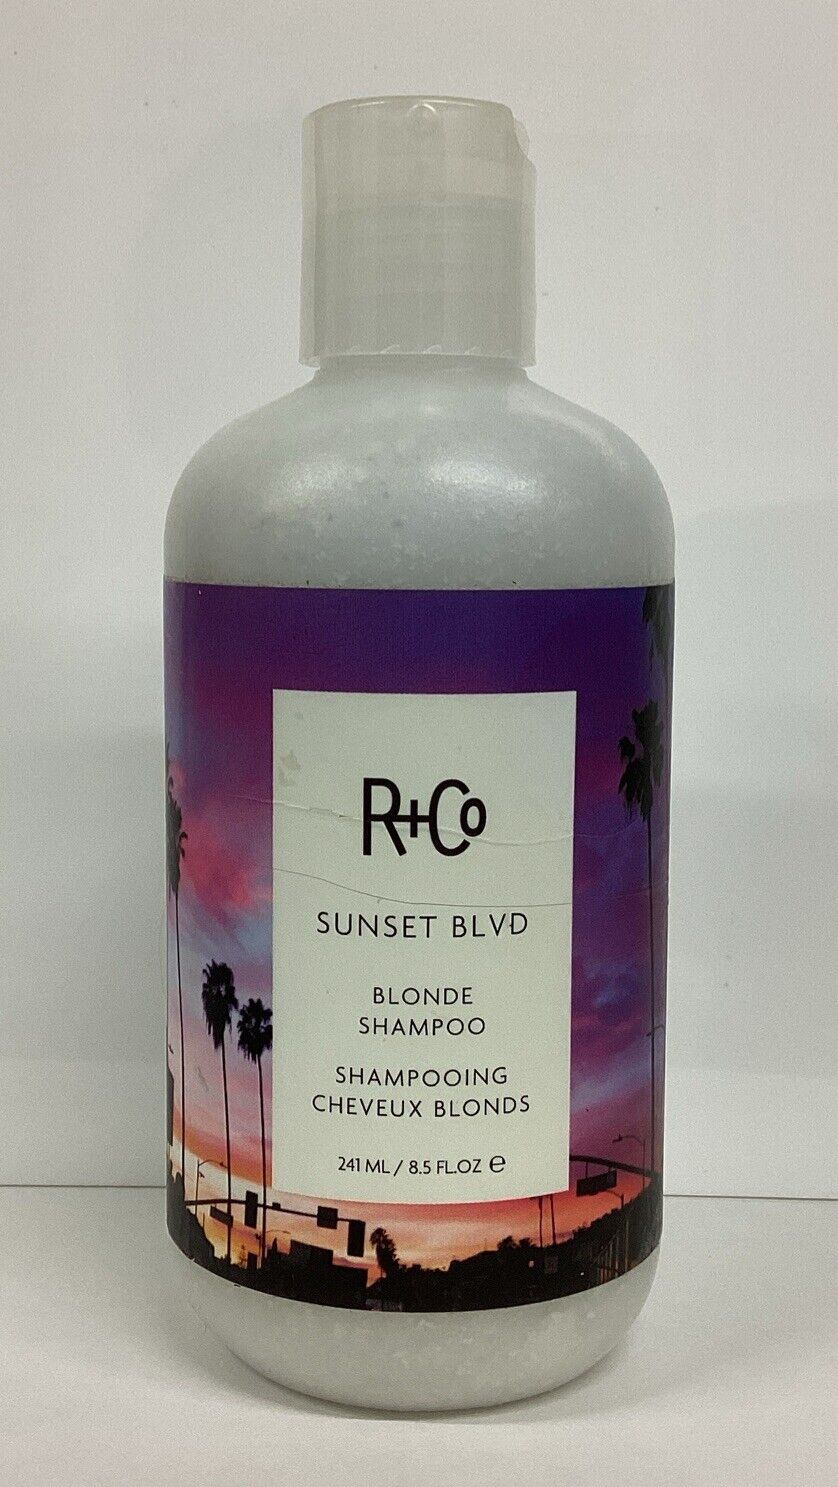 R+co Sunset BLVD Blonde Shampoo 8.5oz As Pictured